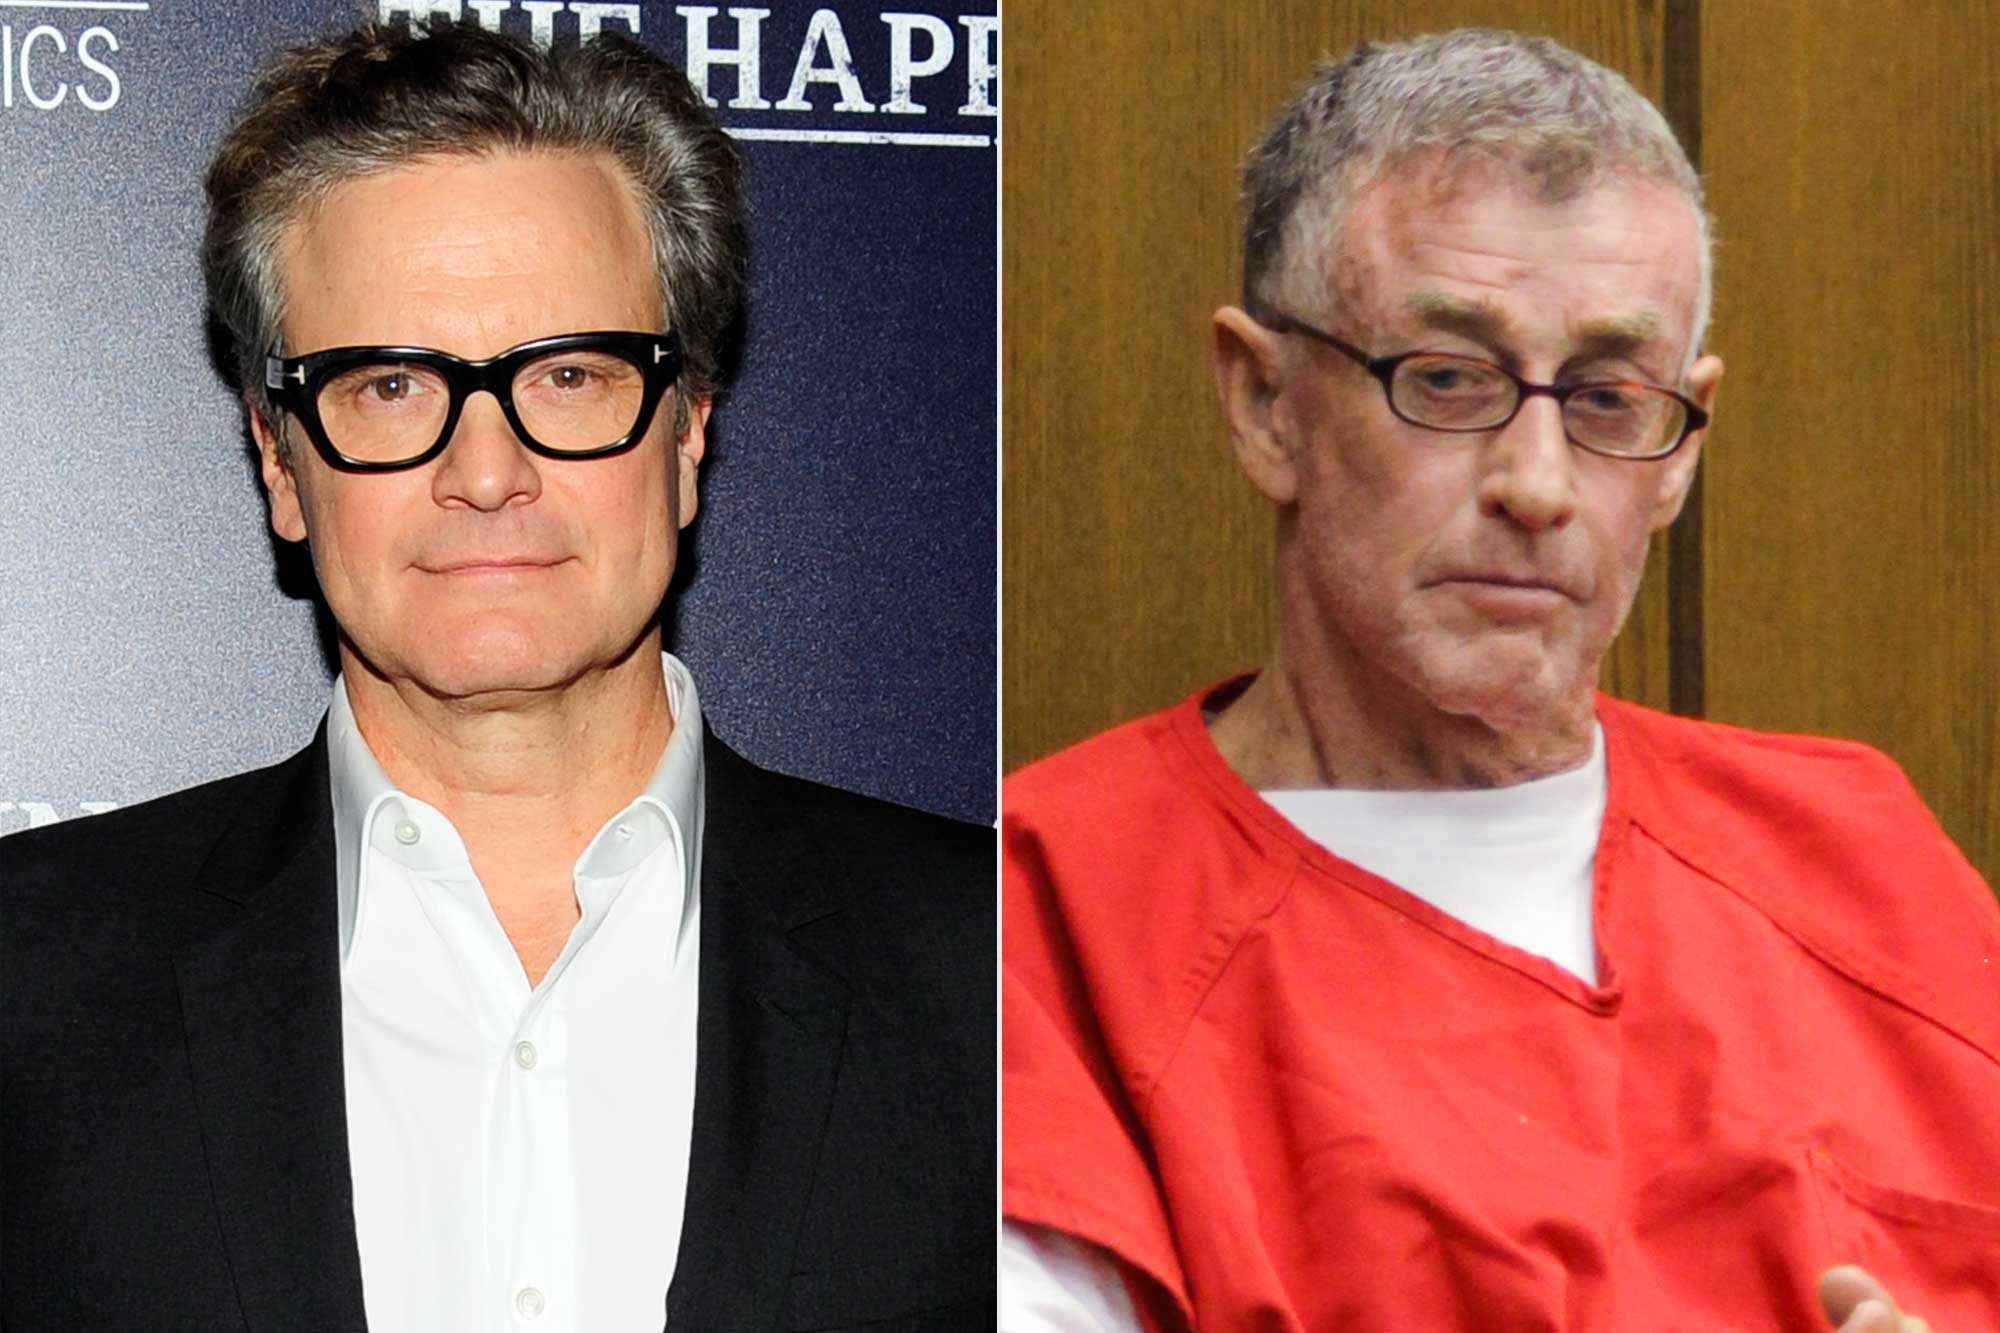 Colin Firth to Star in HBO Max Adaptation of The Staircase True-Crime Docuseries